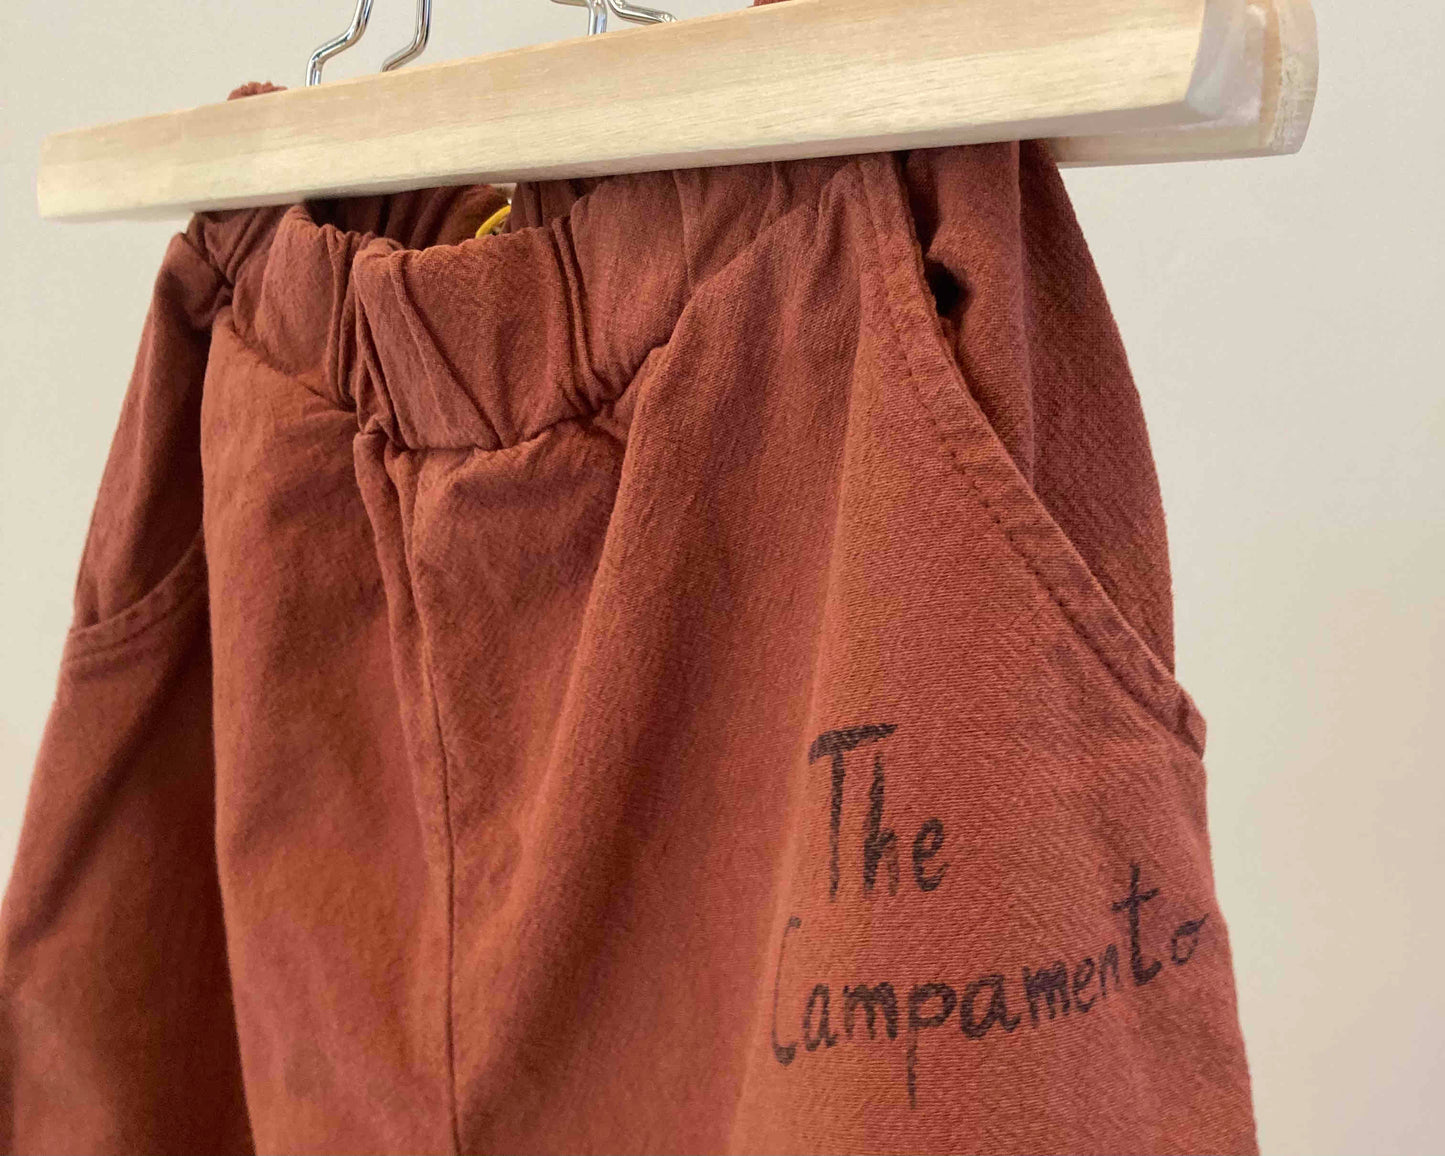 the campamento / brown pants